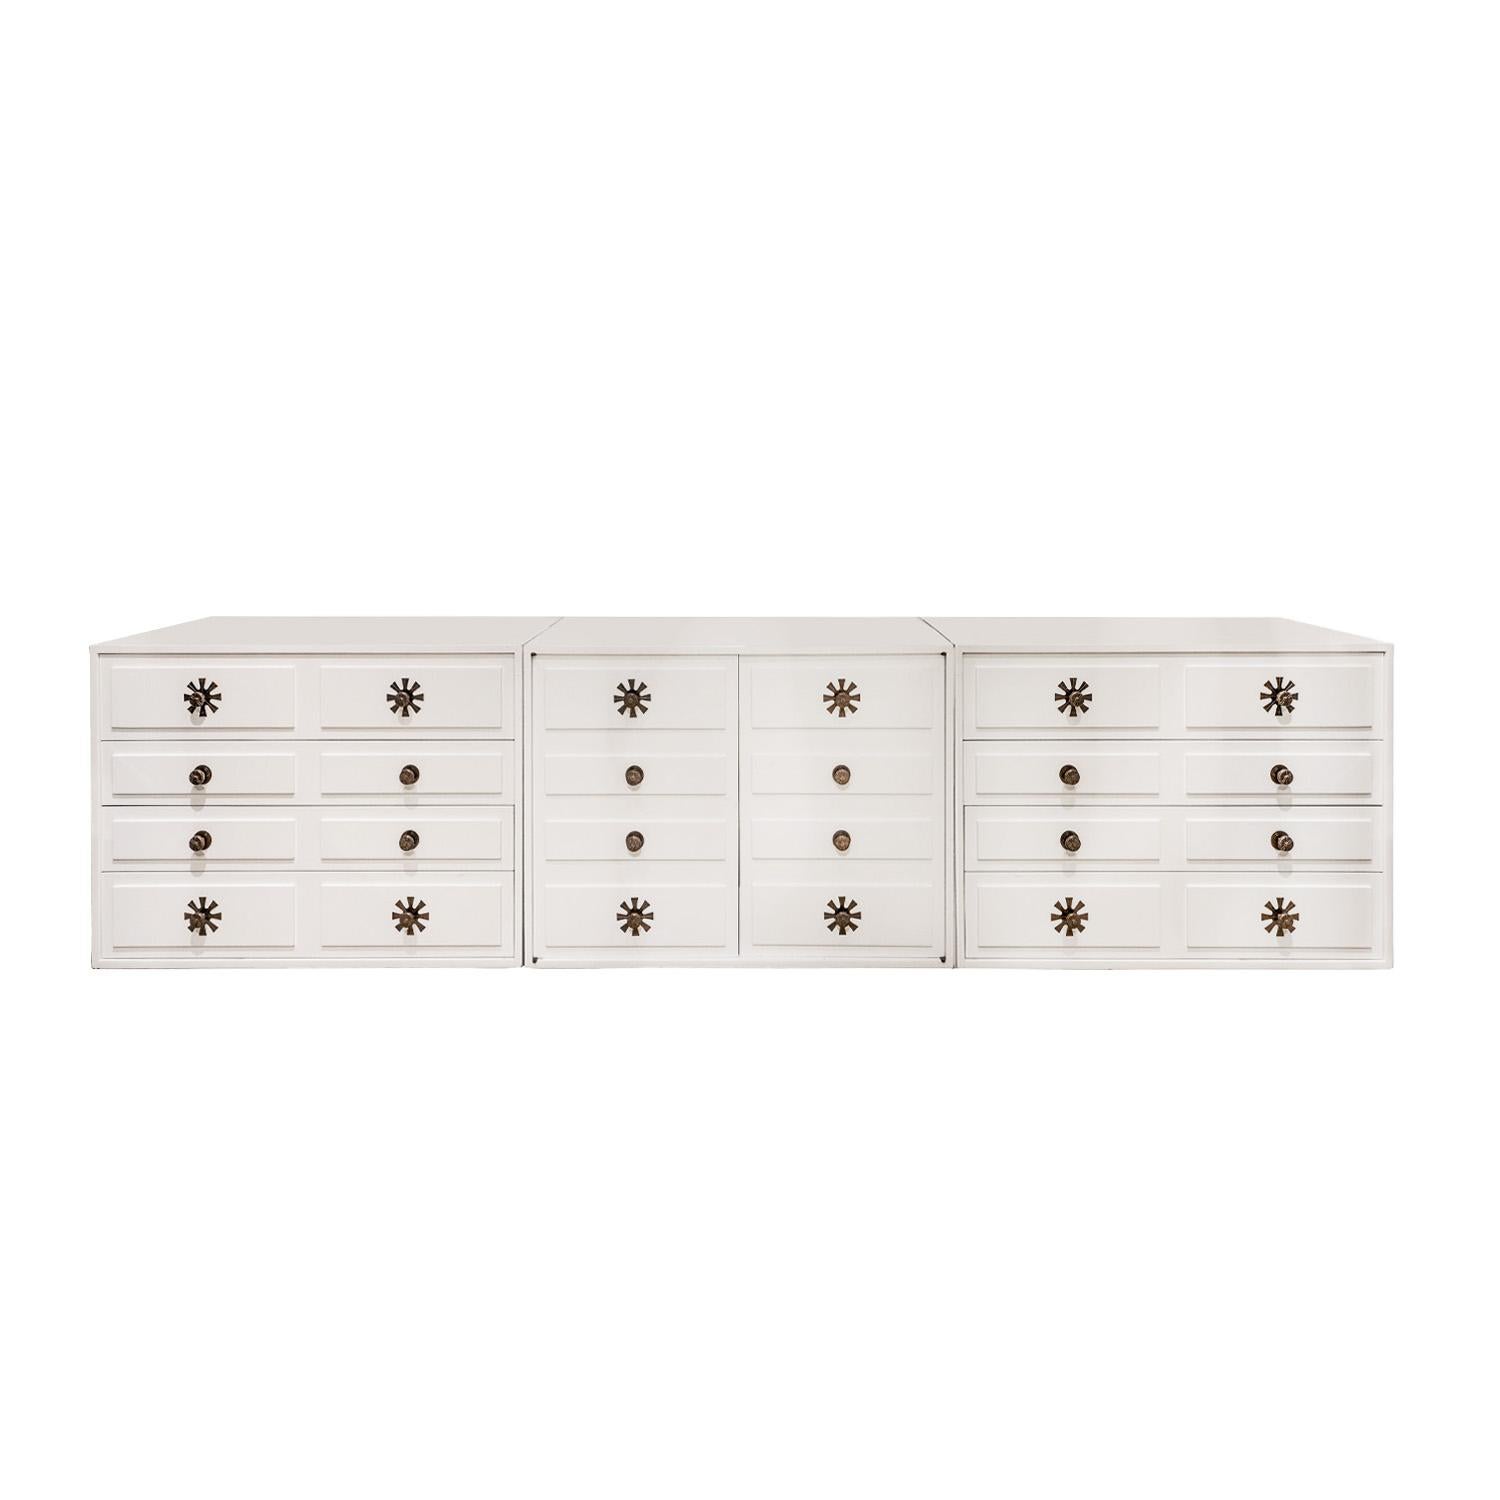 Rare and exceptional long cabinet in white lacquer with bronze stylized flower pulls by Tommi Parzinger for Parzinger Originals, American 1950s (signed “Parzinger Originals” on inside of drawer).  There is 1/2 inch high recessed base.  Chests on